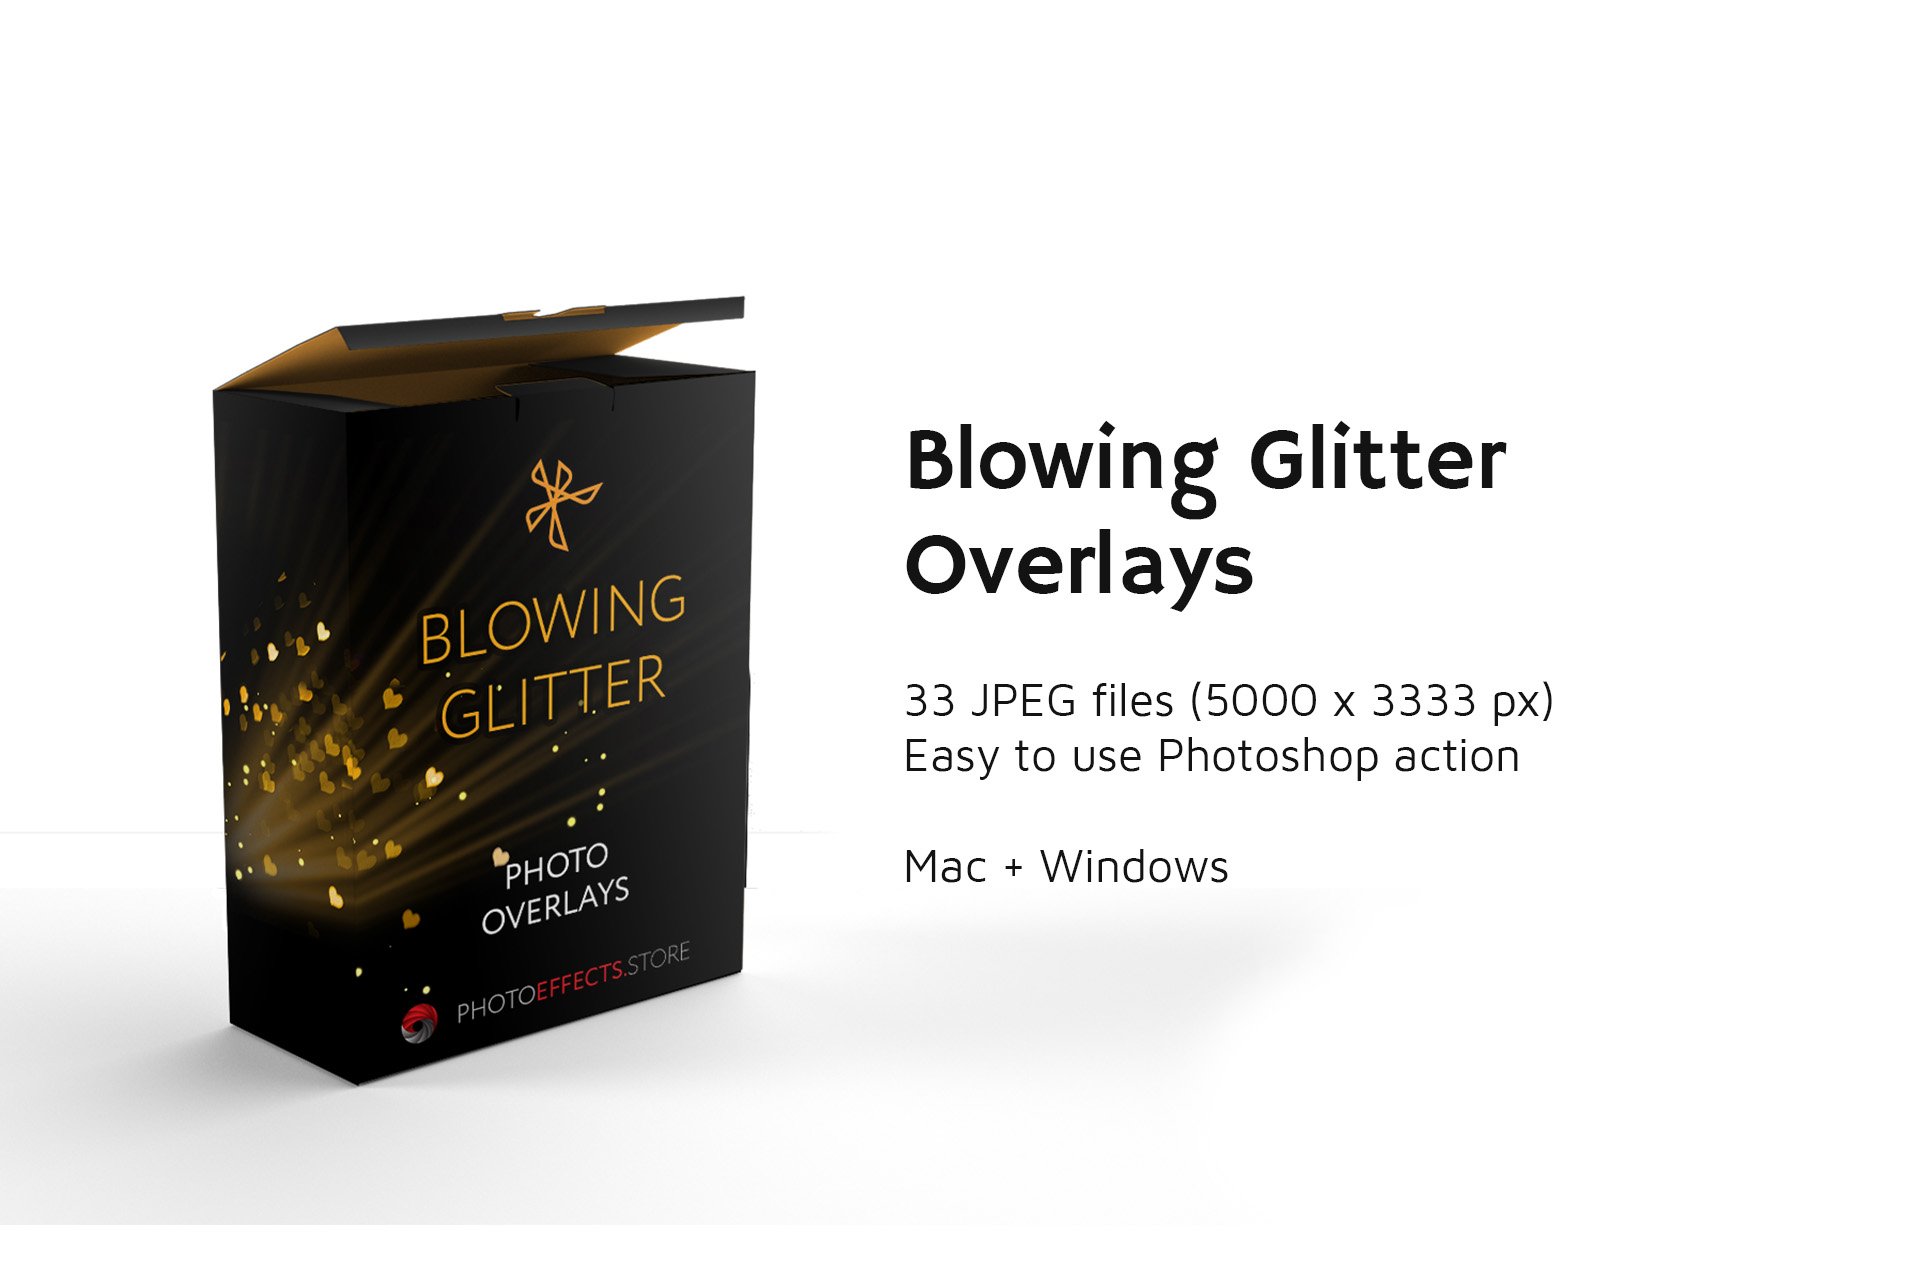 29 Blowing Glitter Photo Overlayspreview image.